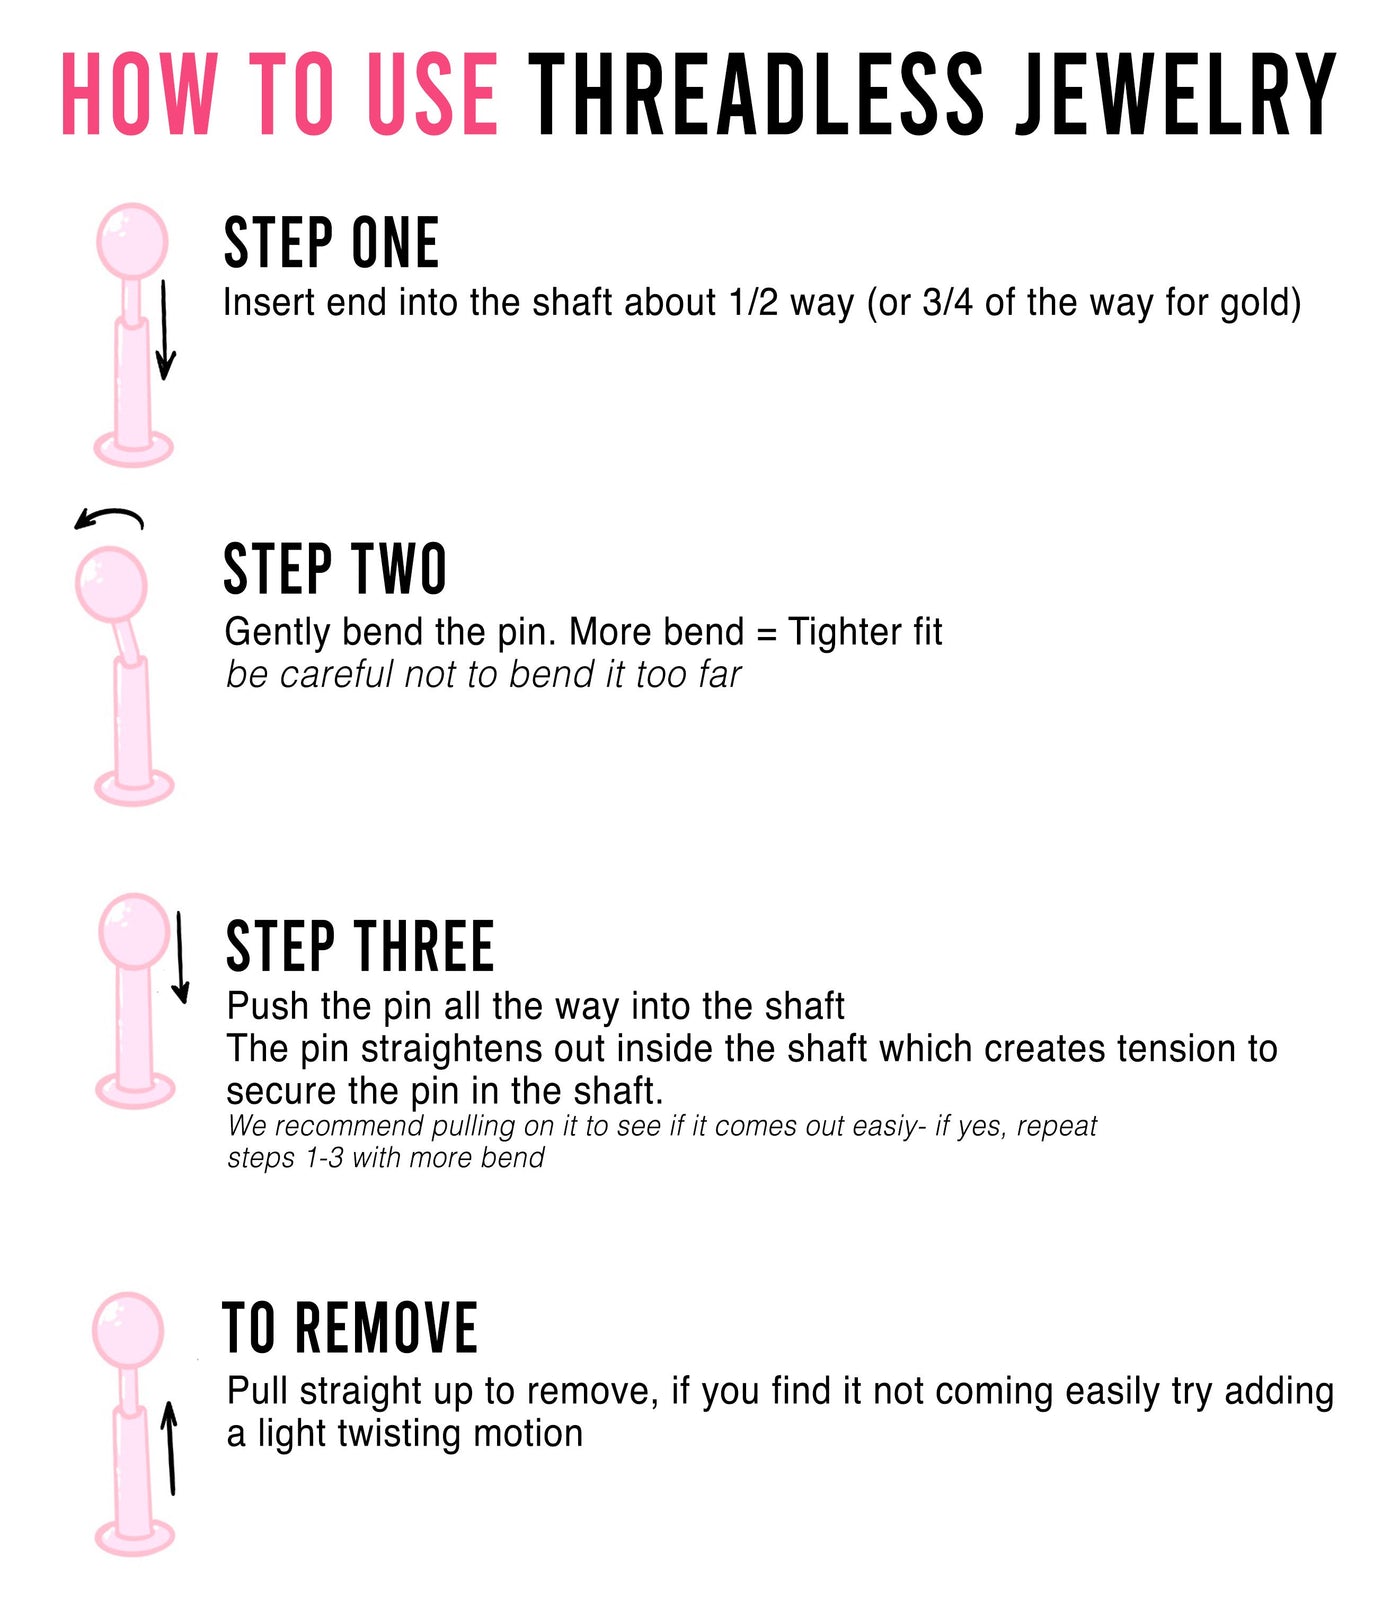 inserting and removing jewelry for beginners